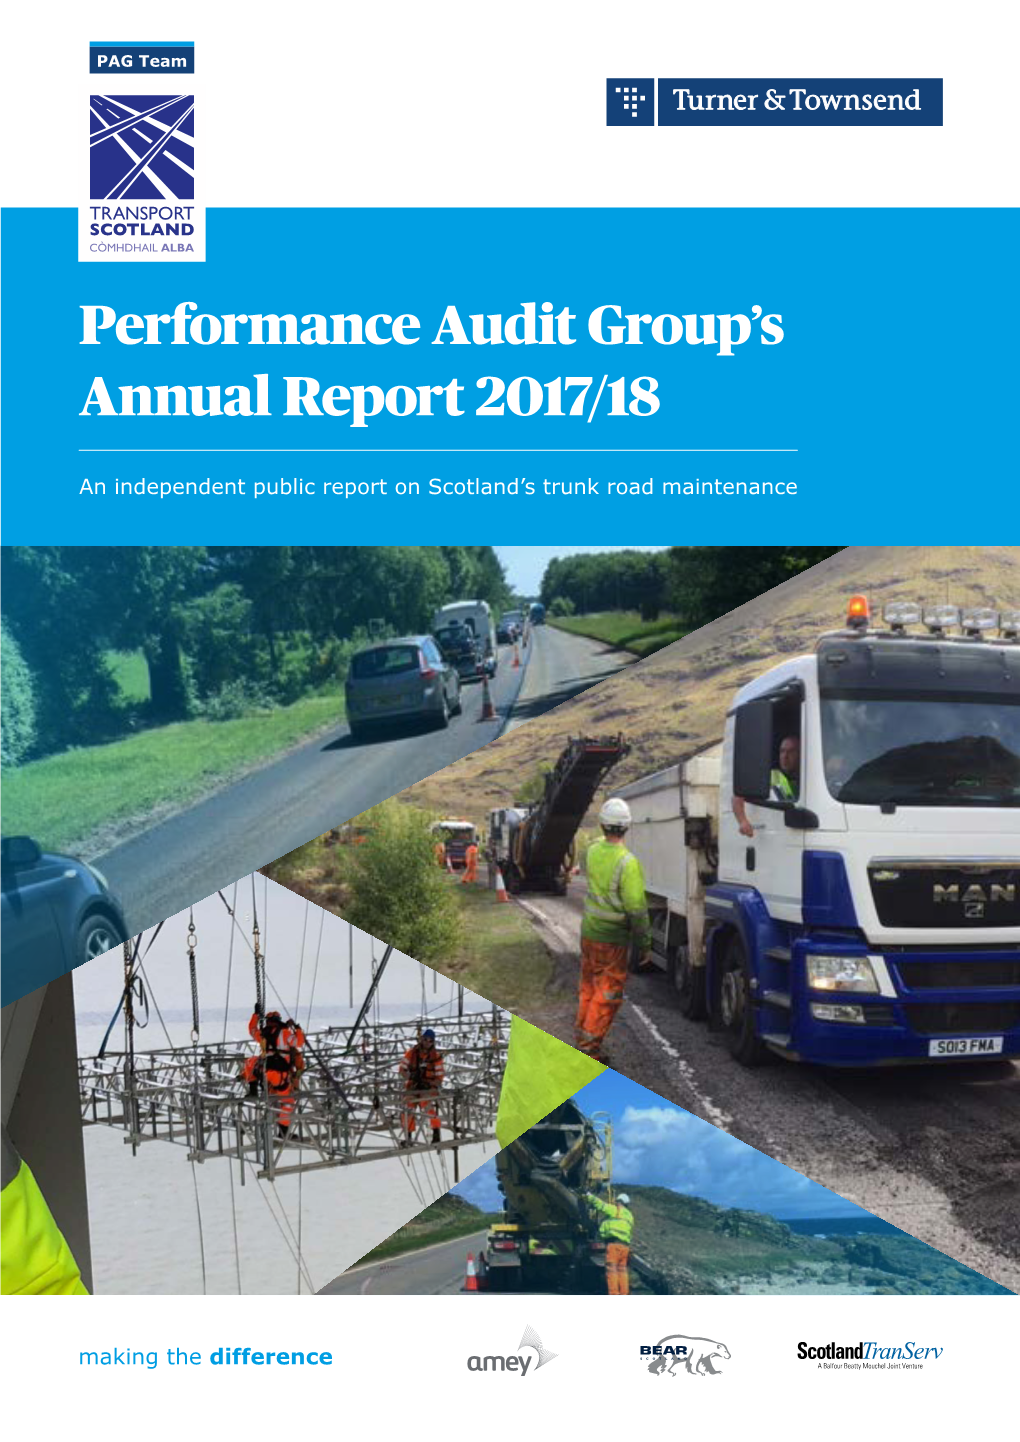 Performance Audit Group's Annual Report 2017/18